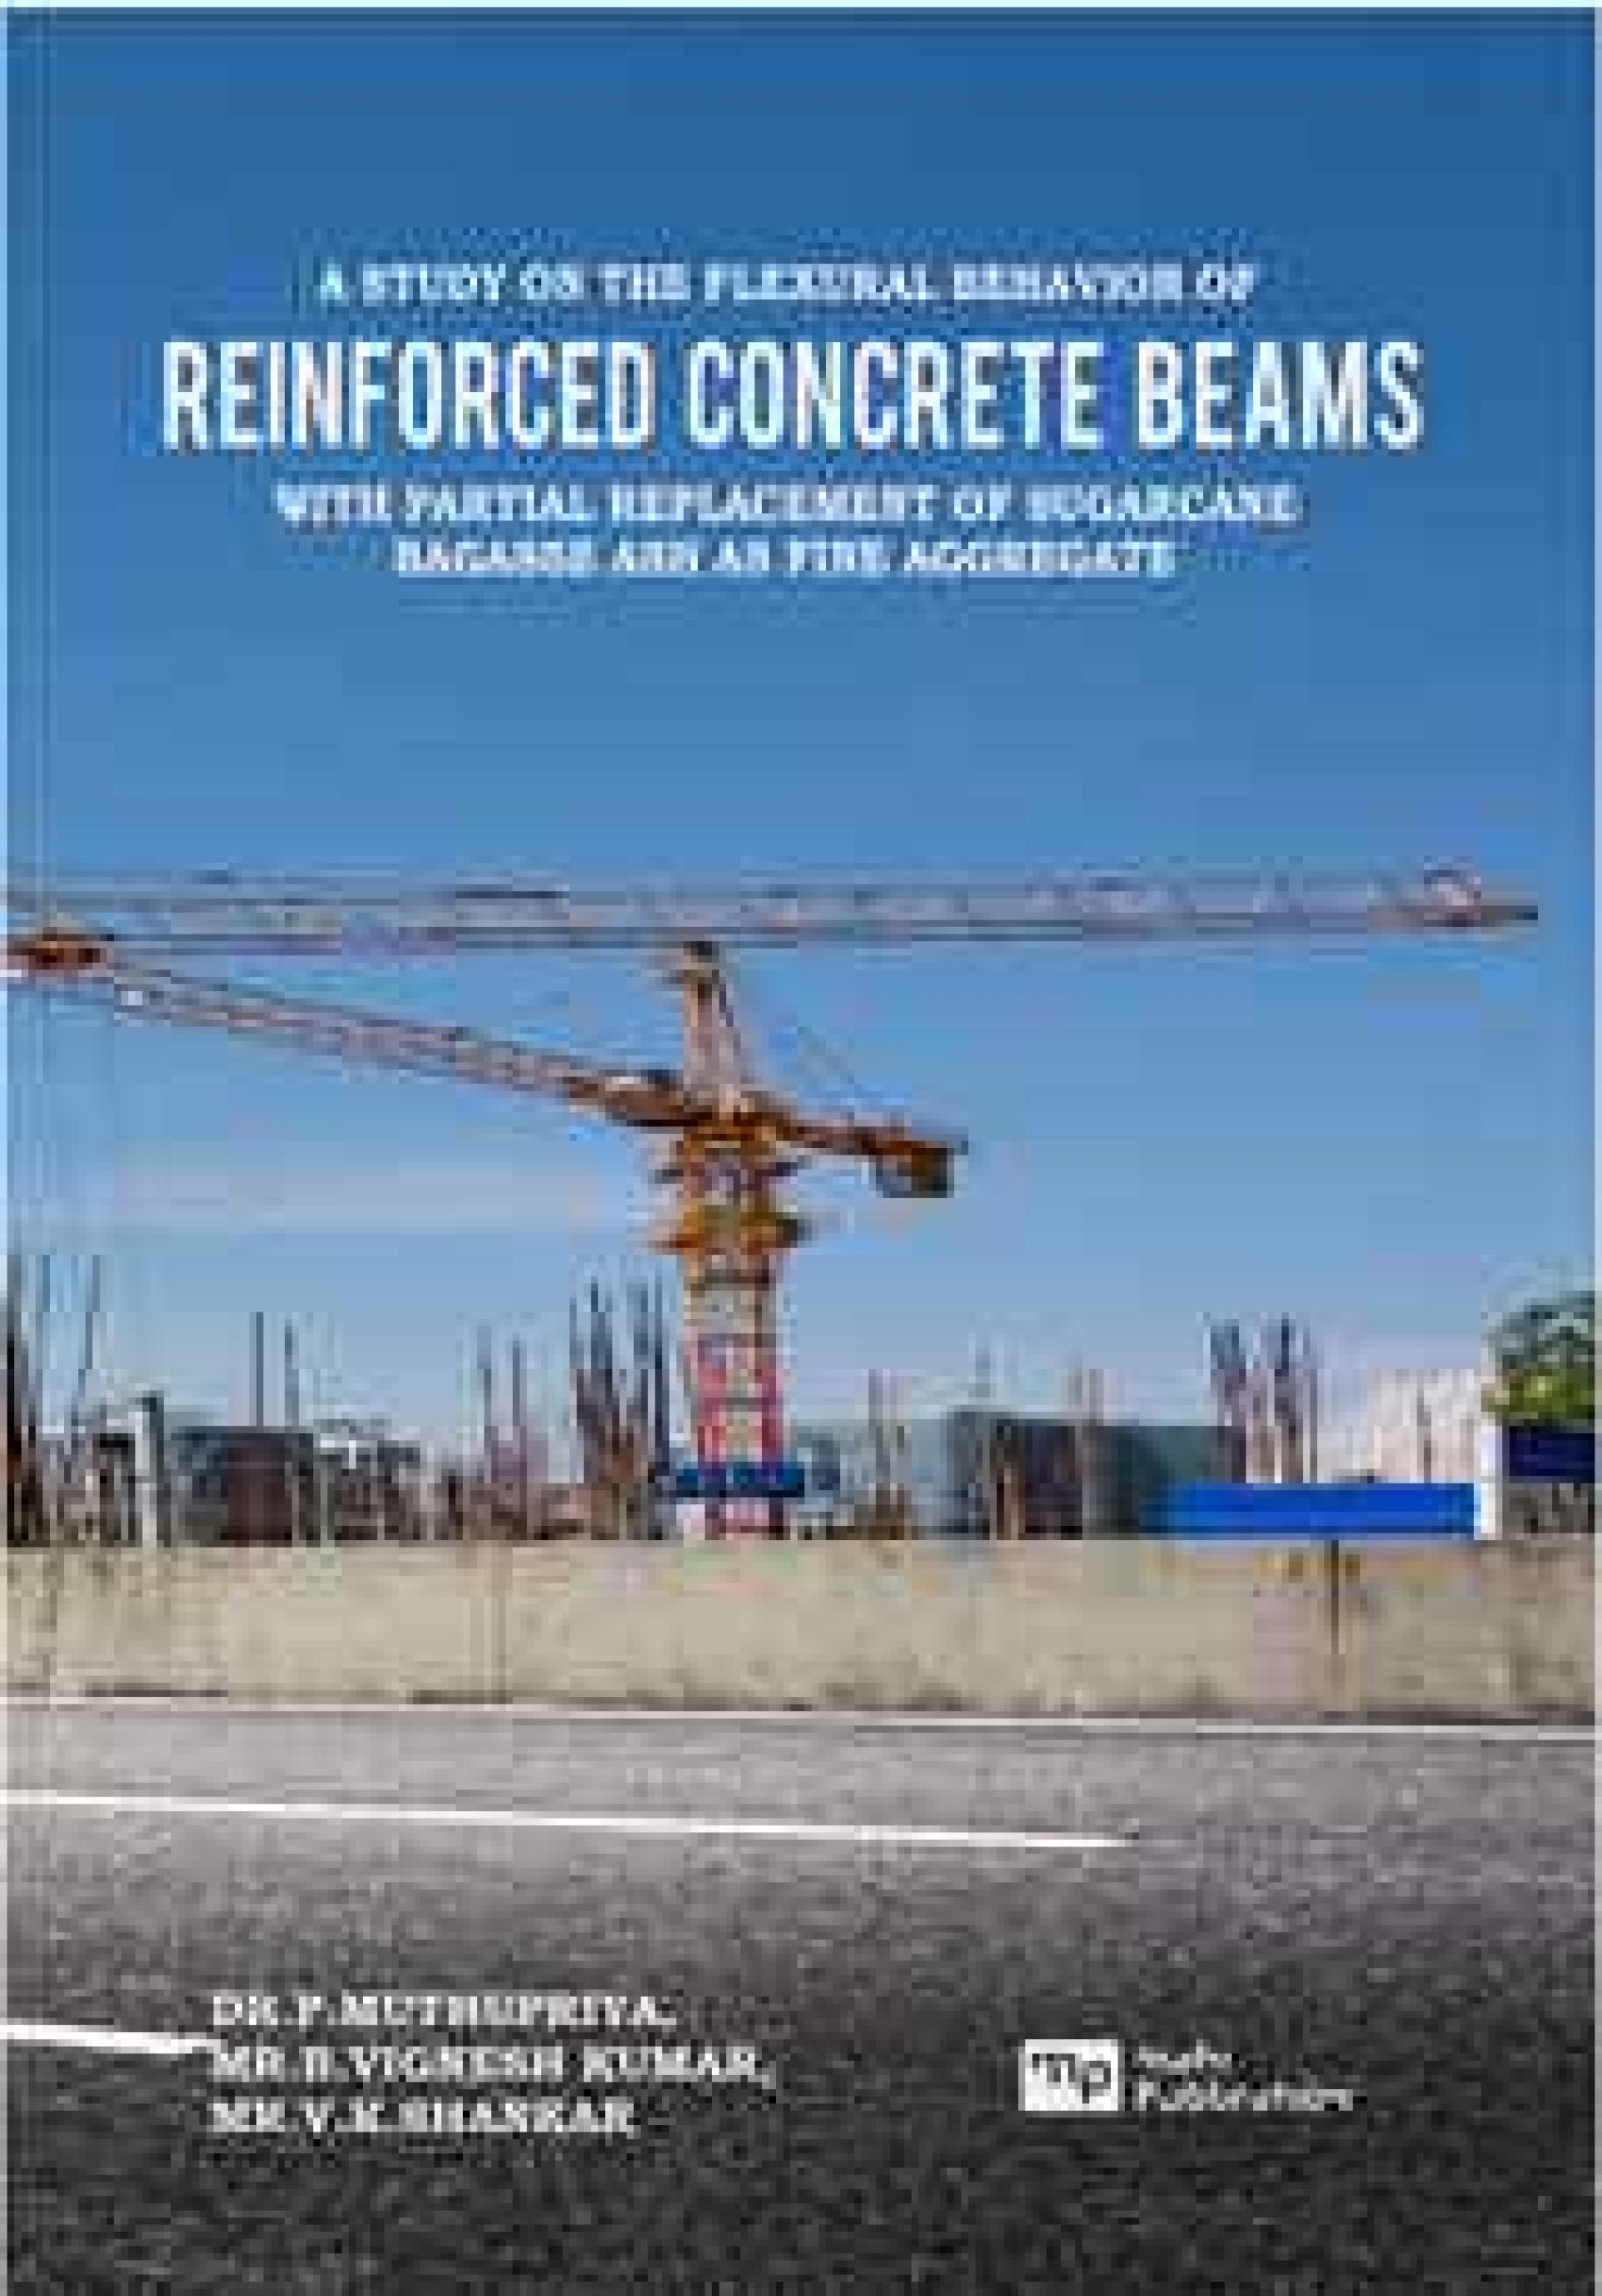 A Study on the fexural behavior of REINFORCED CONCRETE BEAMS With Partial Replacement of Sugarcane Bagasse ASH as Fine Aggregate